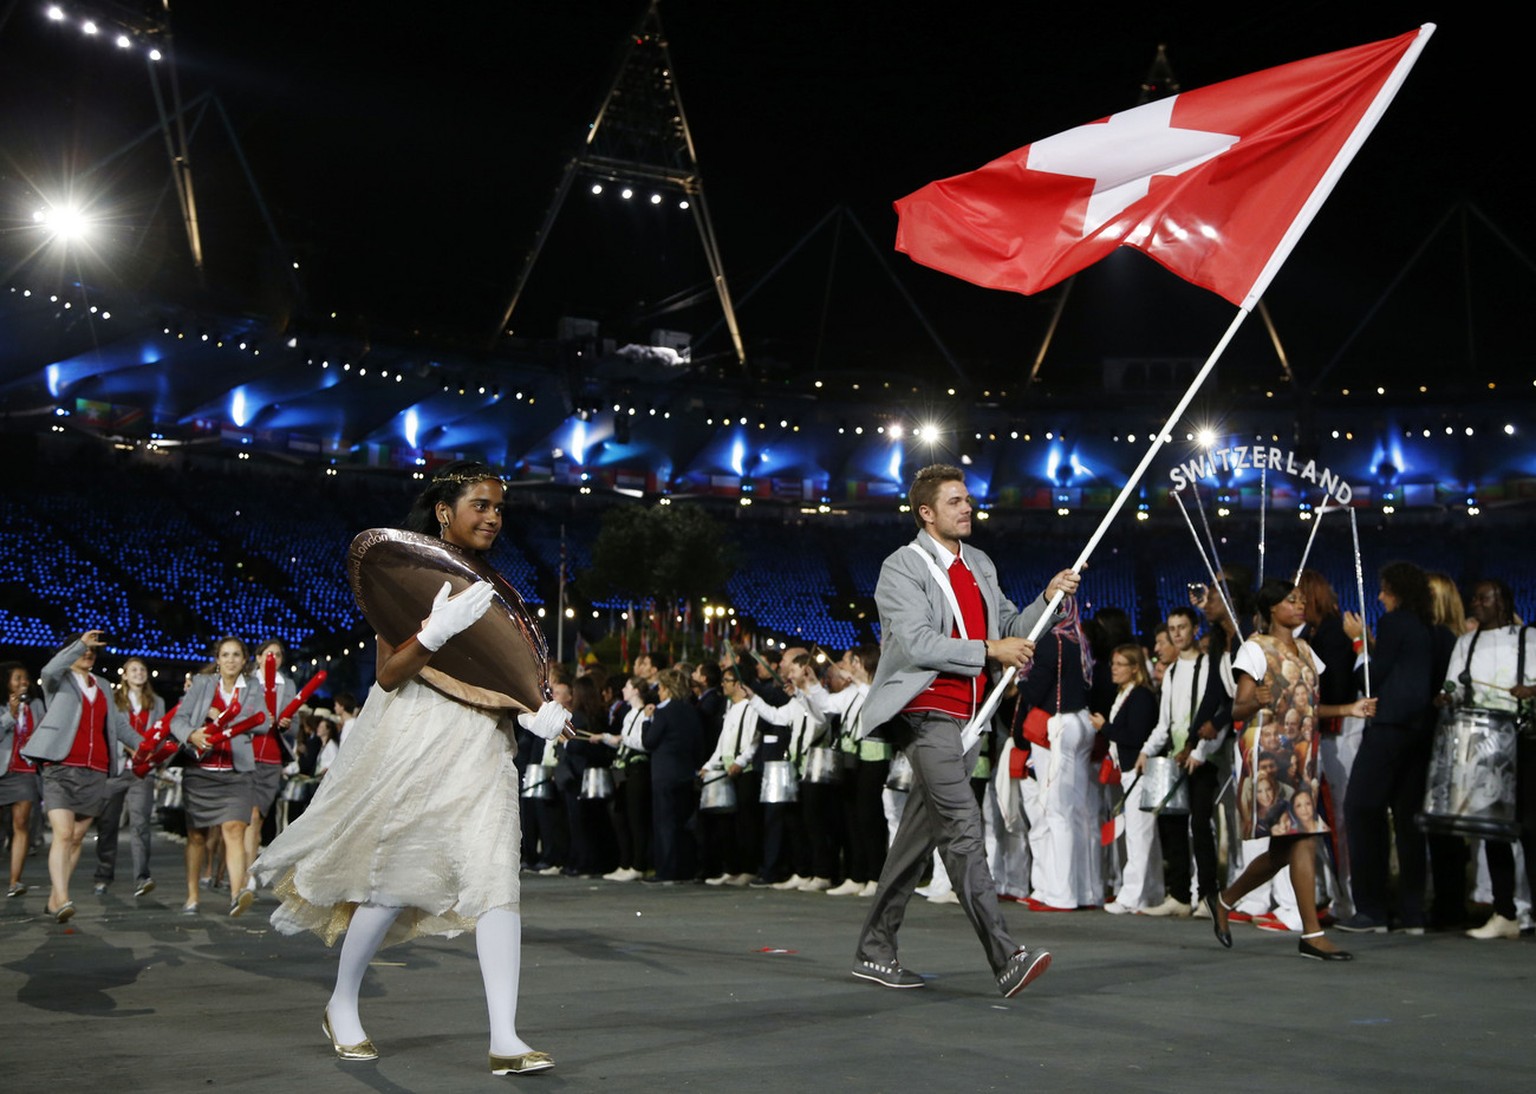 Switzerland&#039;s Stanislas Wawrinka carries the flag during the Opening Ceremony at the 2012 Summer Olympics, Friday, July 27, 2012, in London. (AP Photo/Matt Dunham)